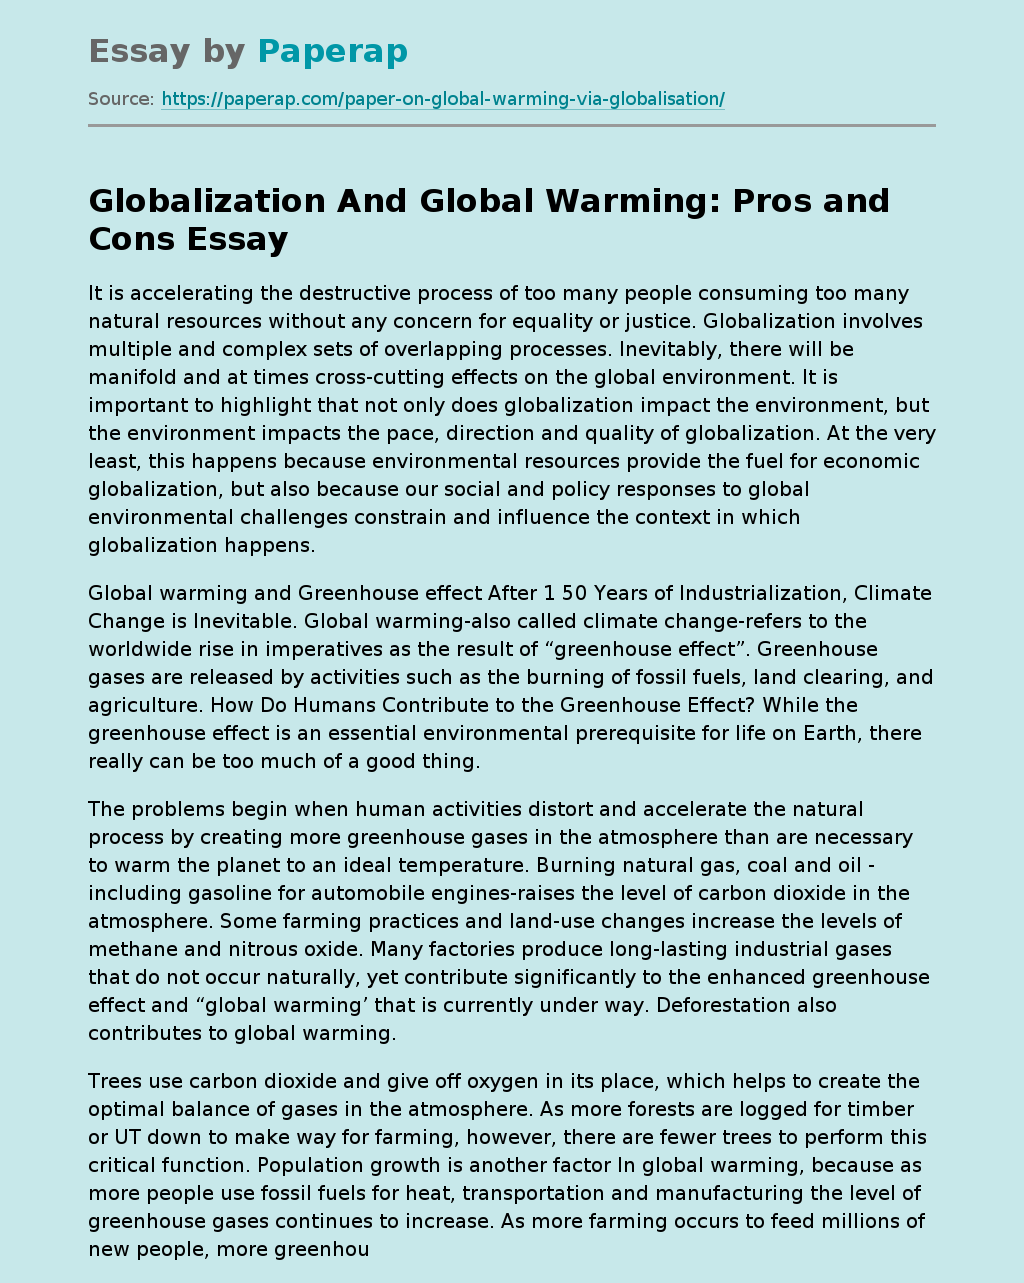 Globalization And Global Warming: Pros and Cons